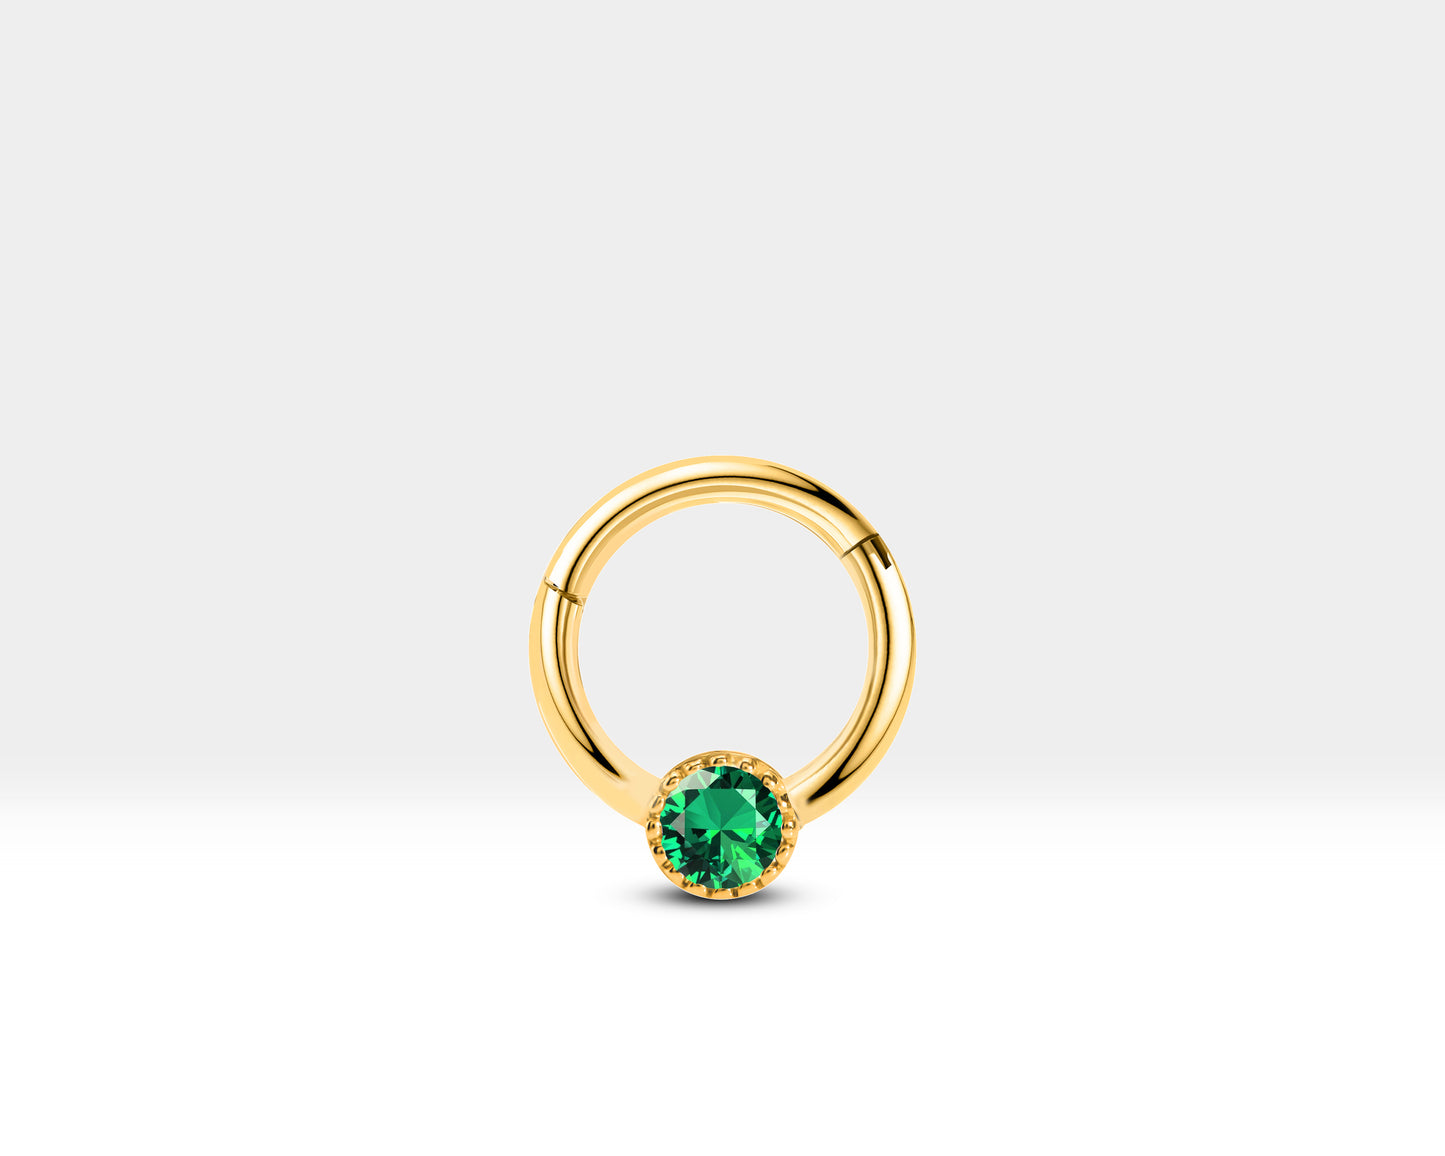 Helix Hoop Clicker Piercing with Green Garnet Hoops in 14K Solid Gold Cartilage Hoops | 10 mm Outer